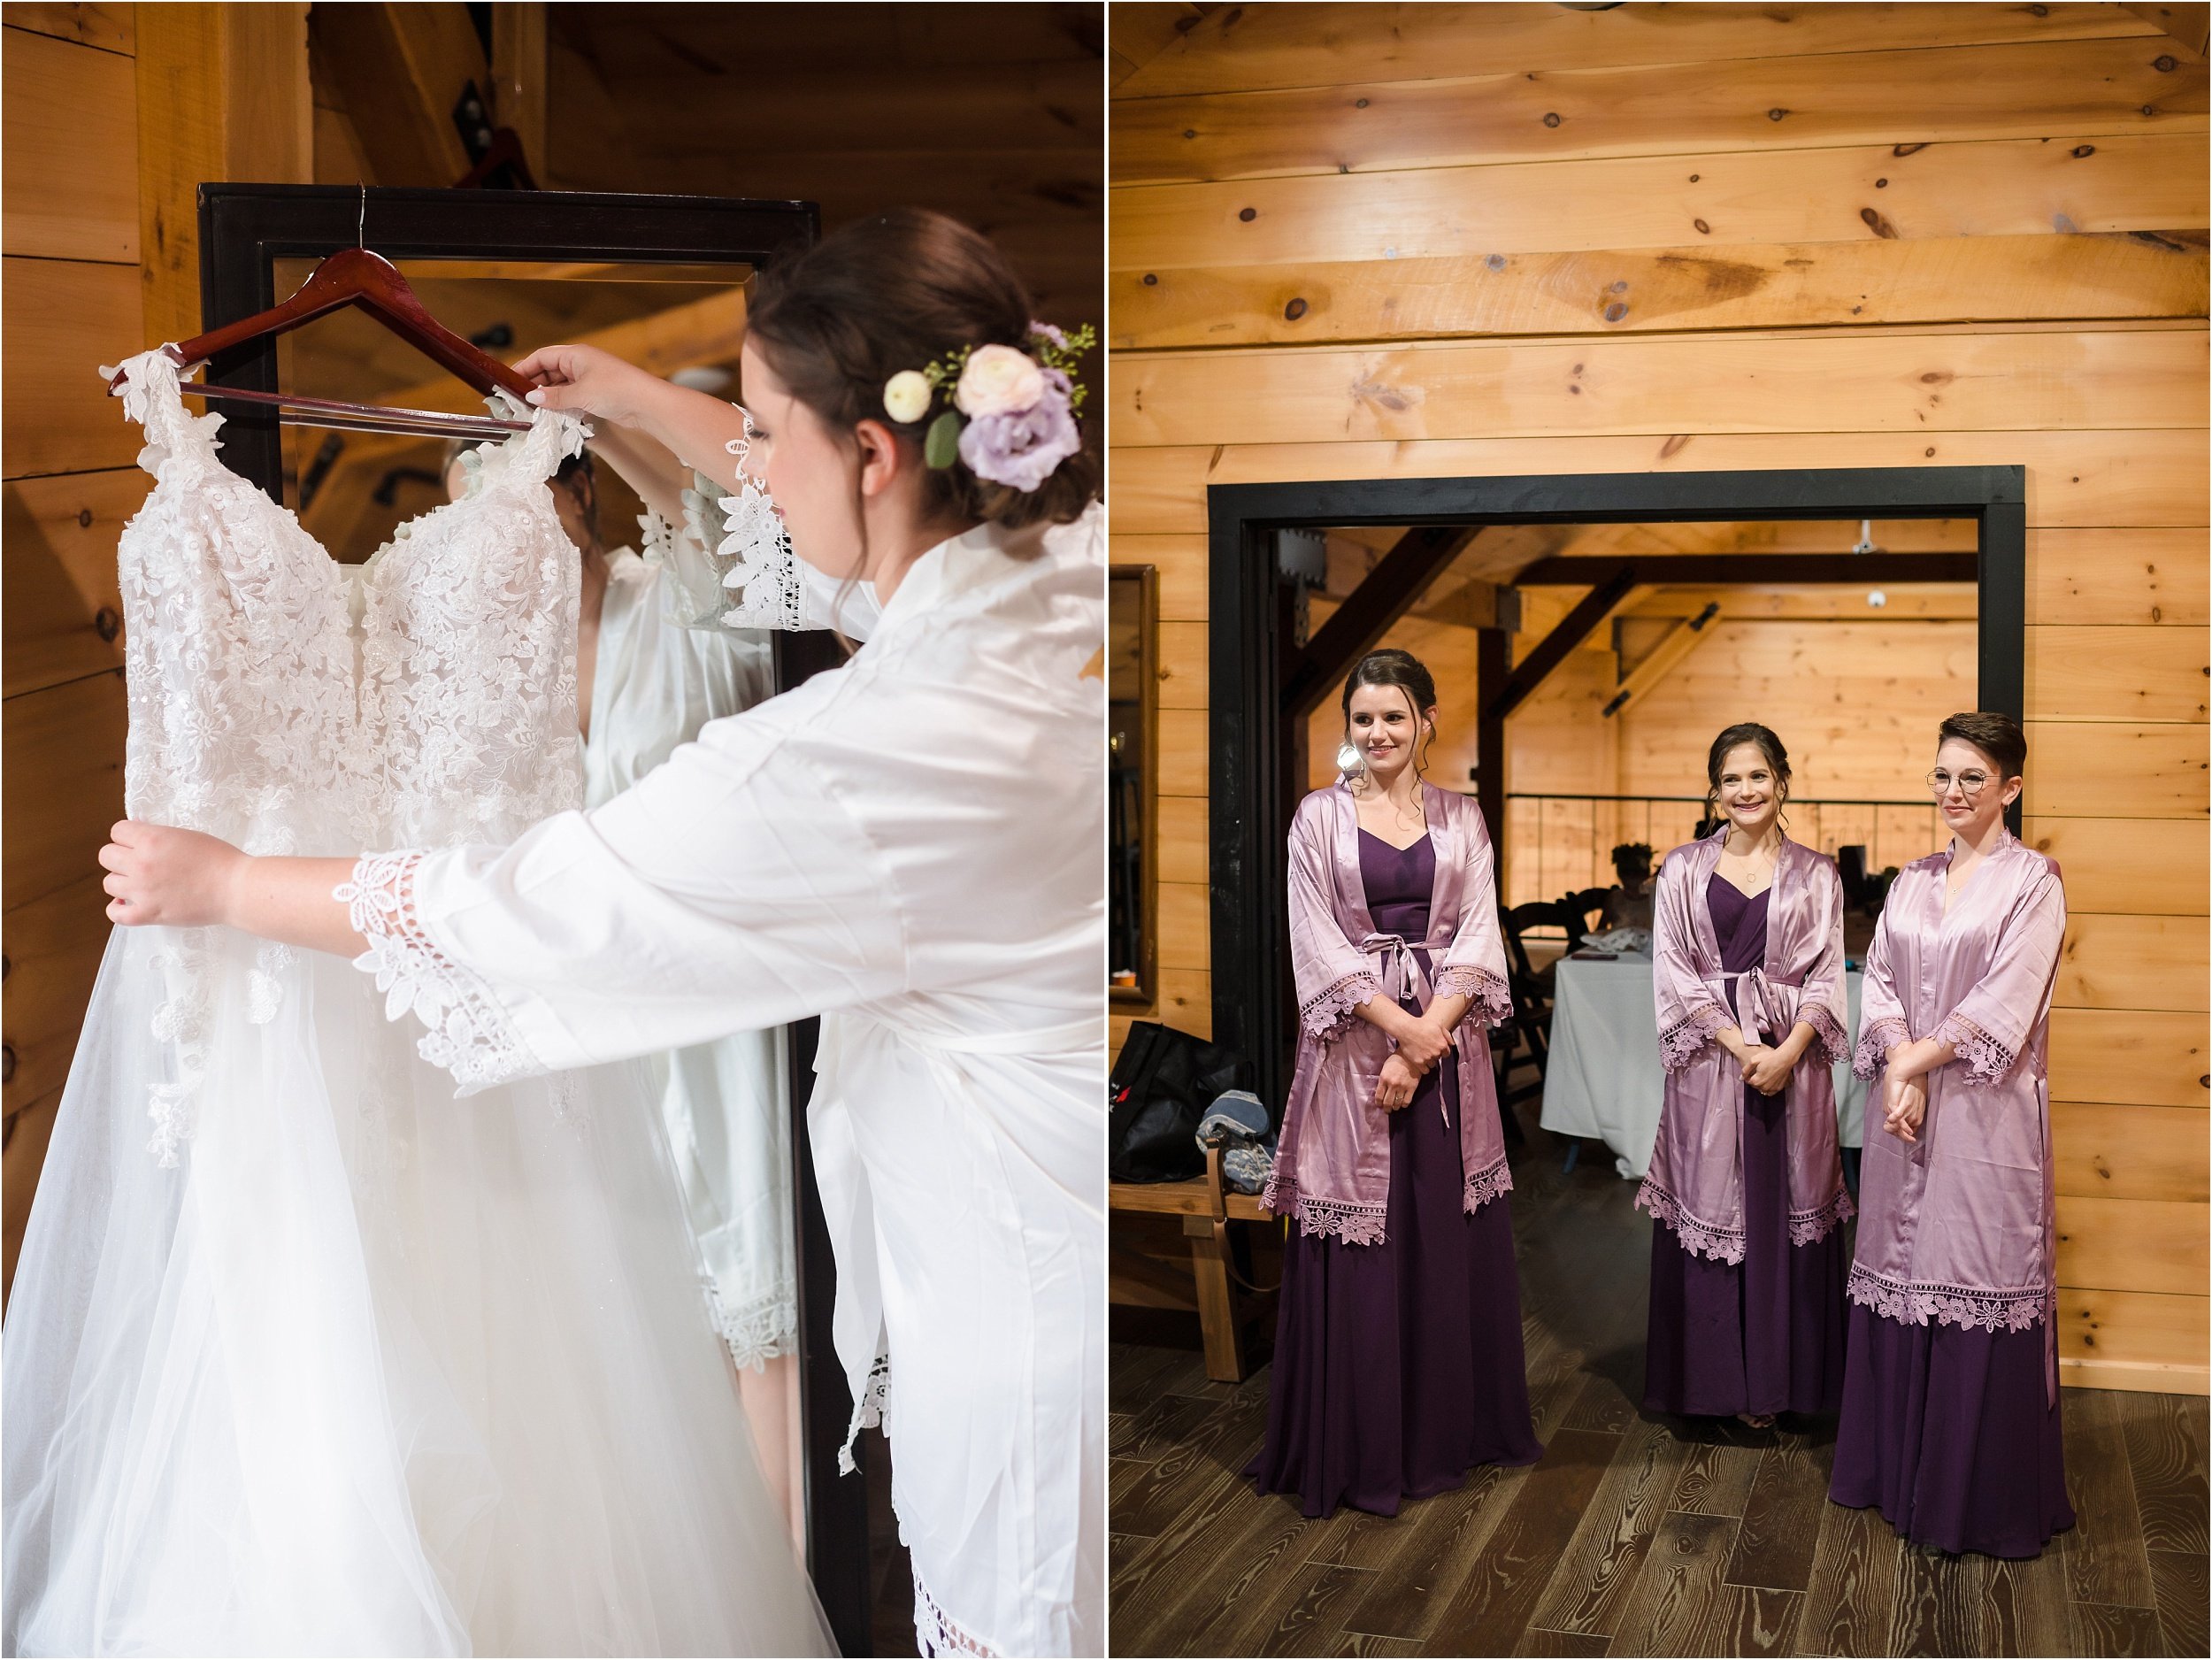  A bride adjusting her formal wedding gown before putting it on, while her bridesmaids wearing matching purple robes watches.  